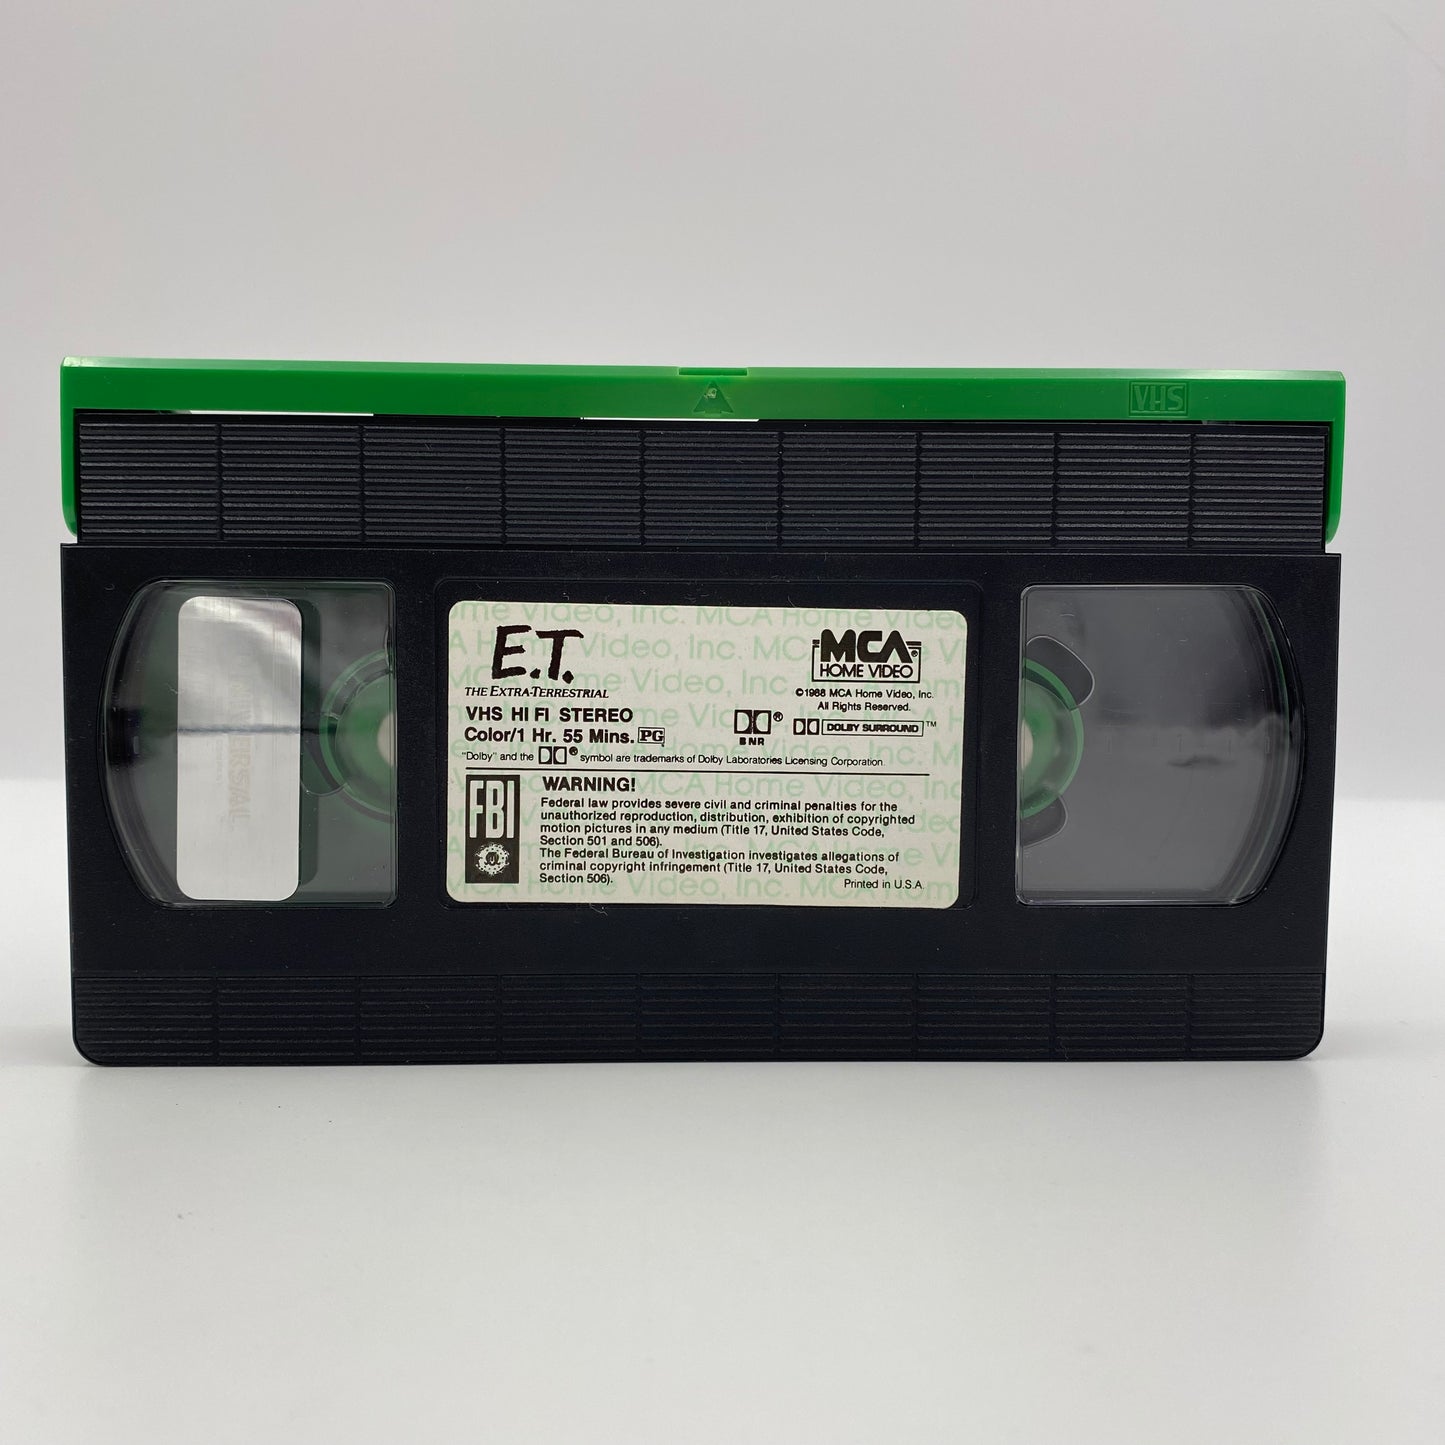 E.T. The Extra Terrestrial VHS tape (1988) MCA Home Video